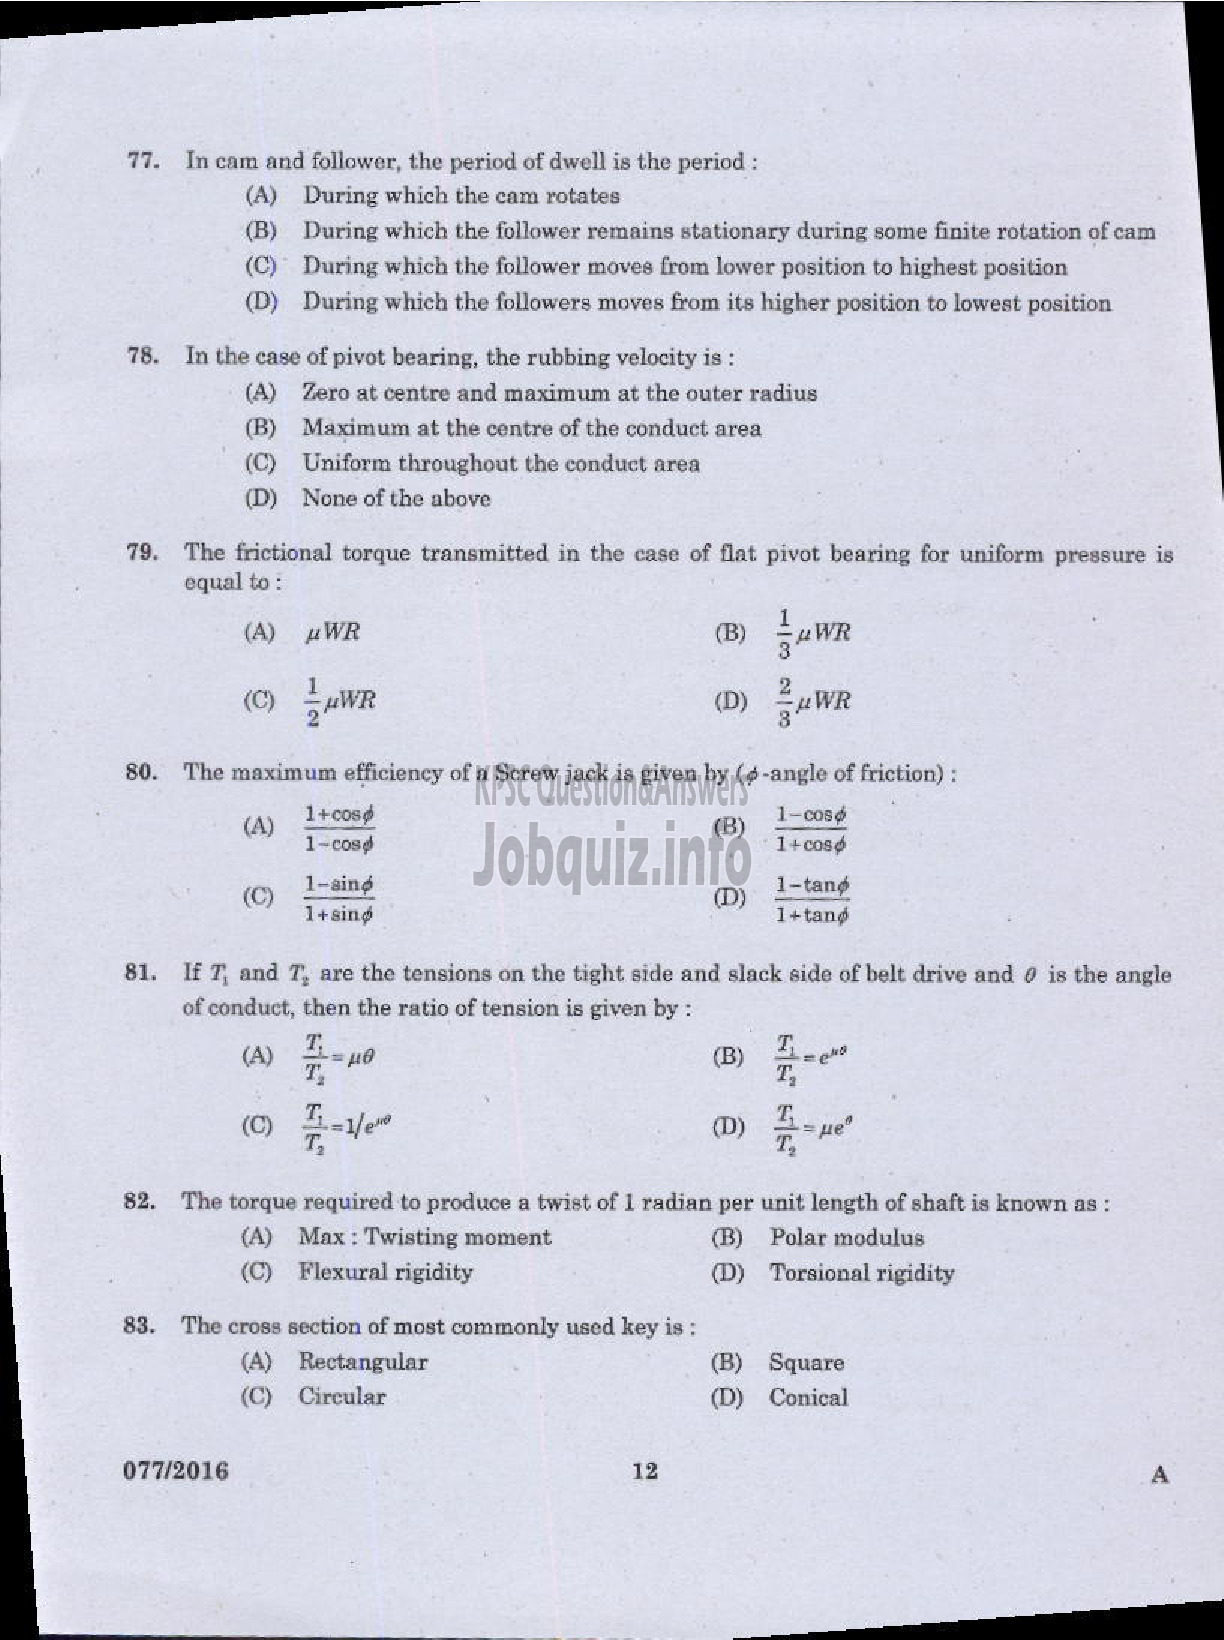 Kerala PSC Question Paper - VOCATIONAL INSTRUCTOR IN MECHANICAL SERVICING AGRO MACHINERY VHSE-10